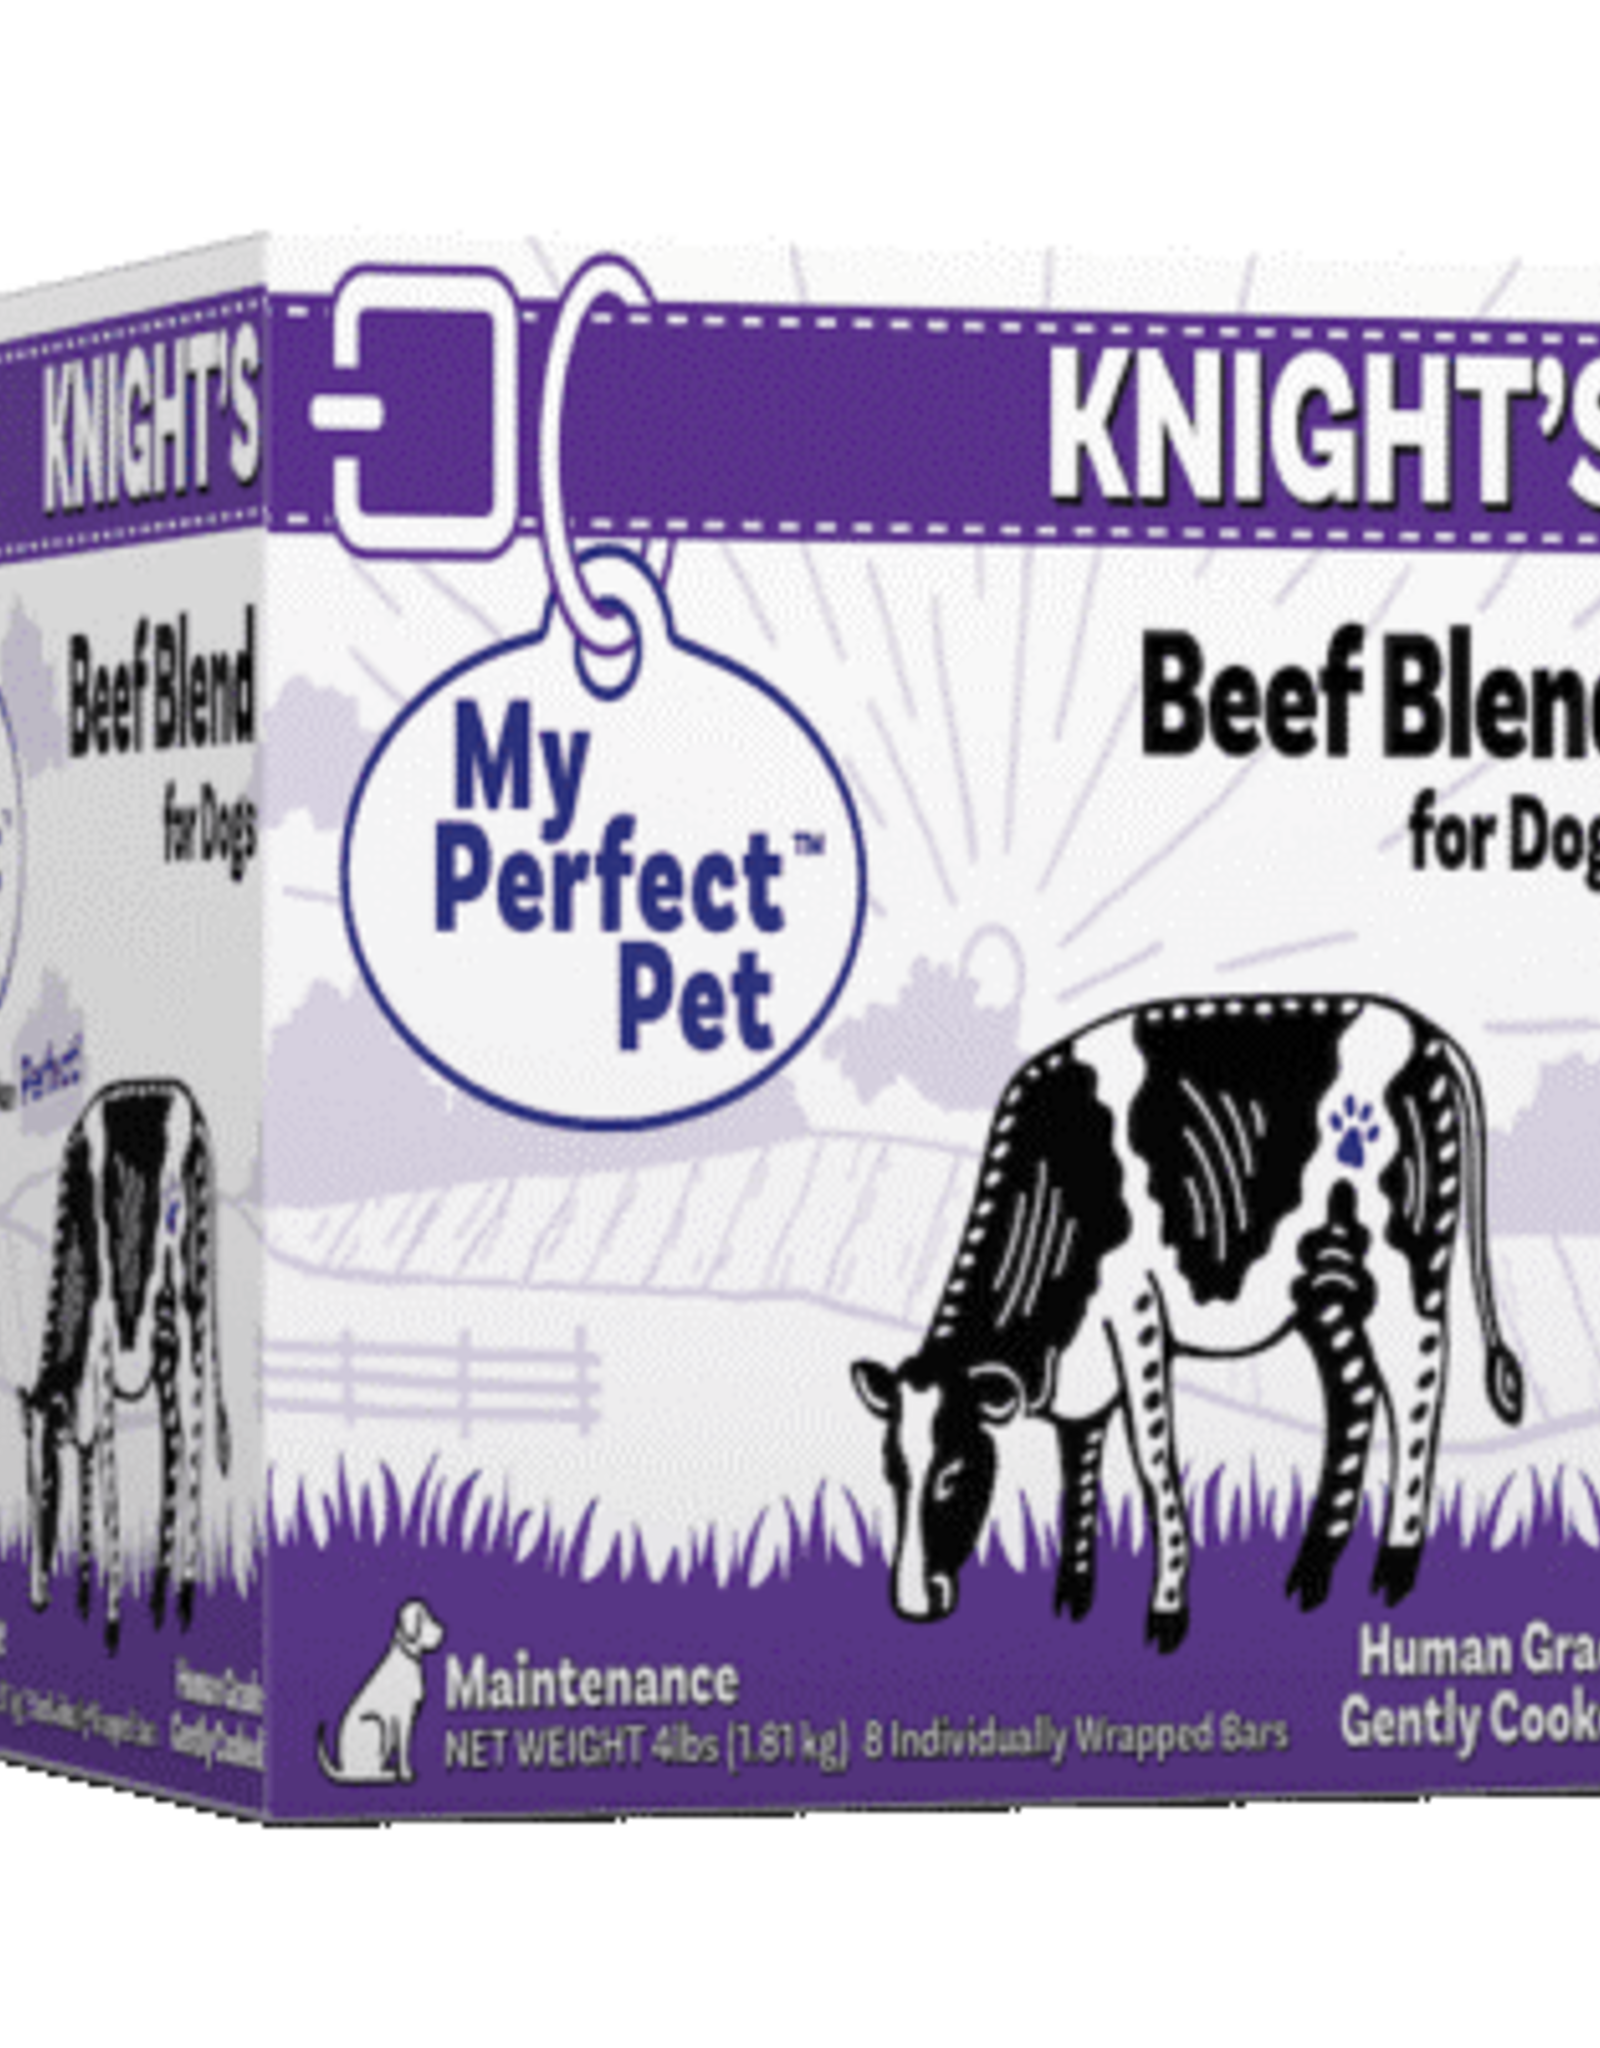 My Perfect Pet My Perfect Pet Knight's Beef Blend